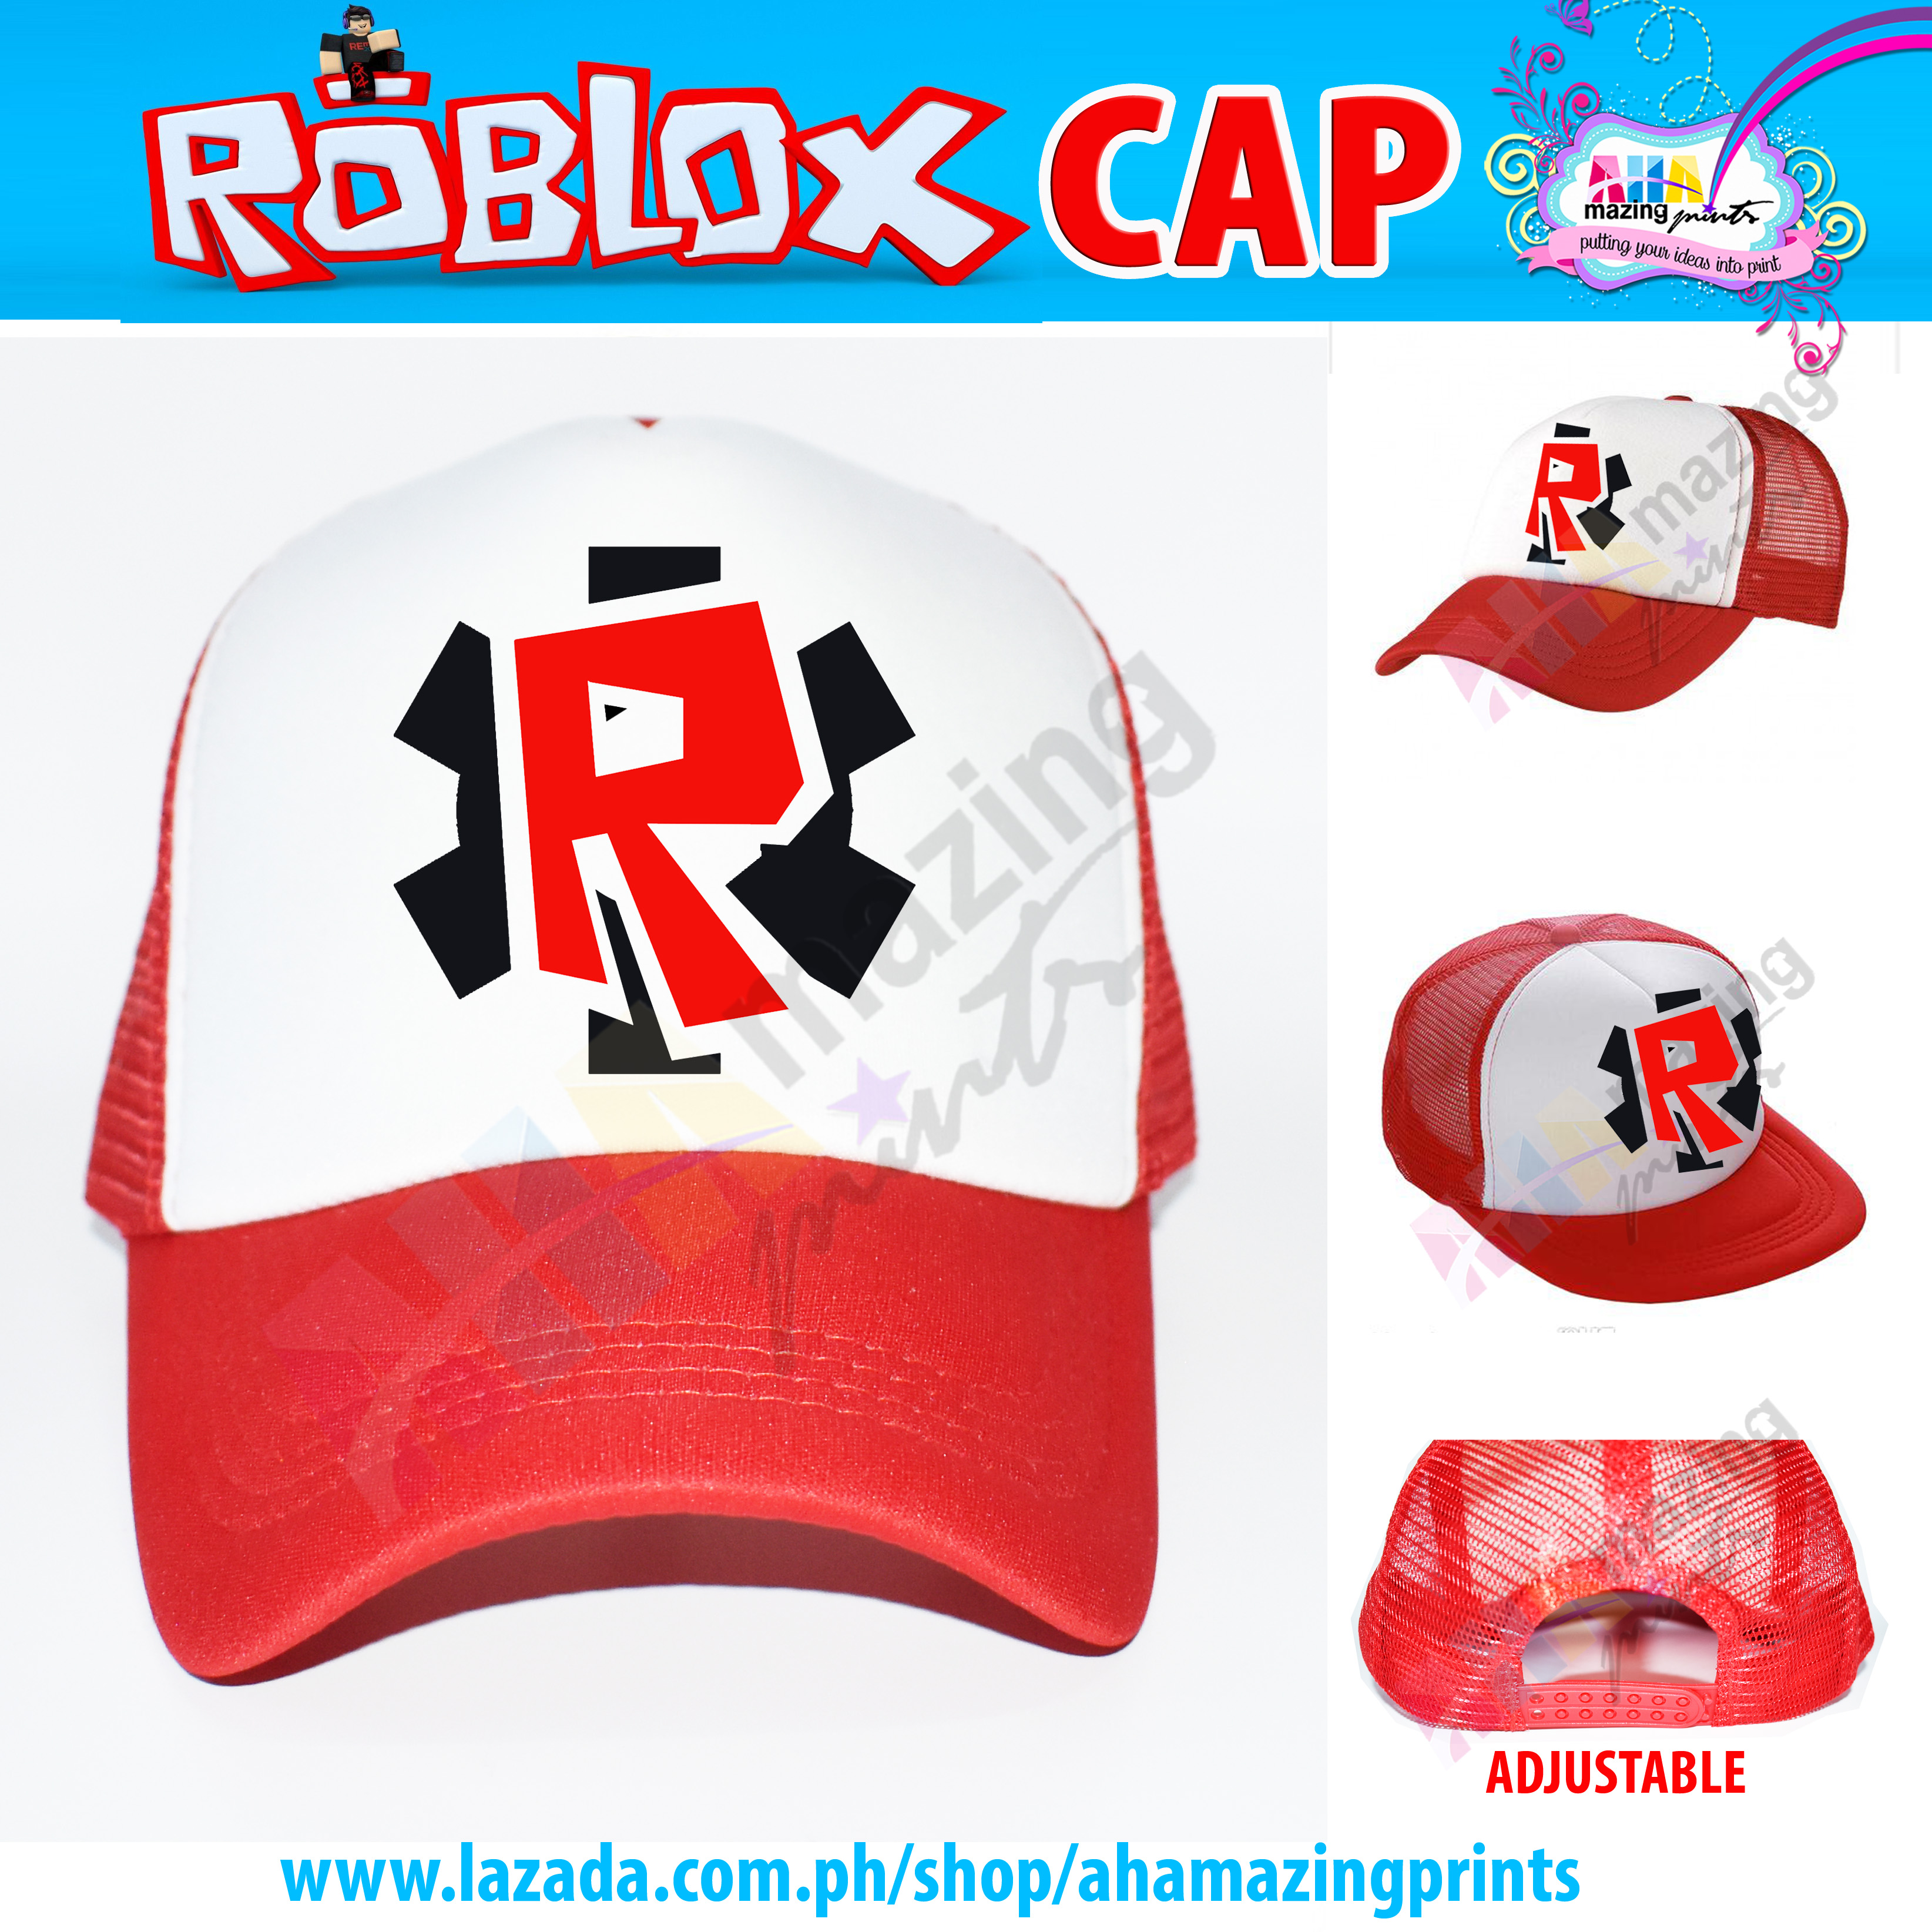 Roblox Gear Adjustable White Red Hat Cap Kids Fashion Top Boys Little Boys And Girls Unisex Statement Casual Custom Children Wear Baby Cute Trending Viral Ootd High Quality Birthday Christmas Ninang Ninong - cape roblox gear